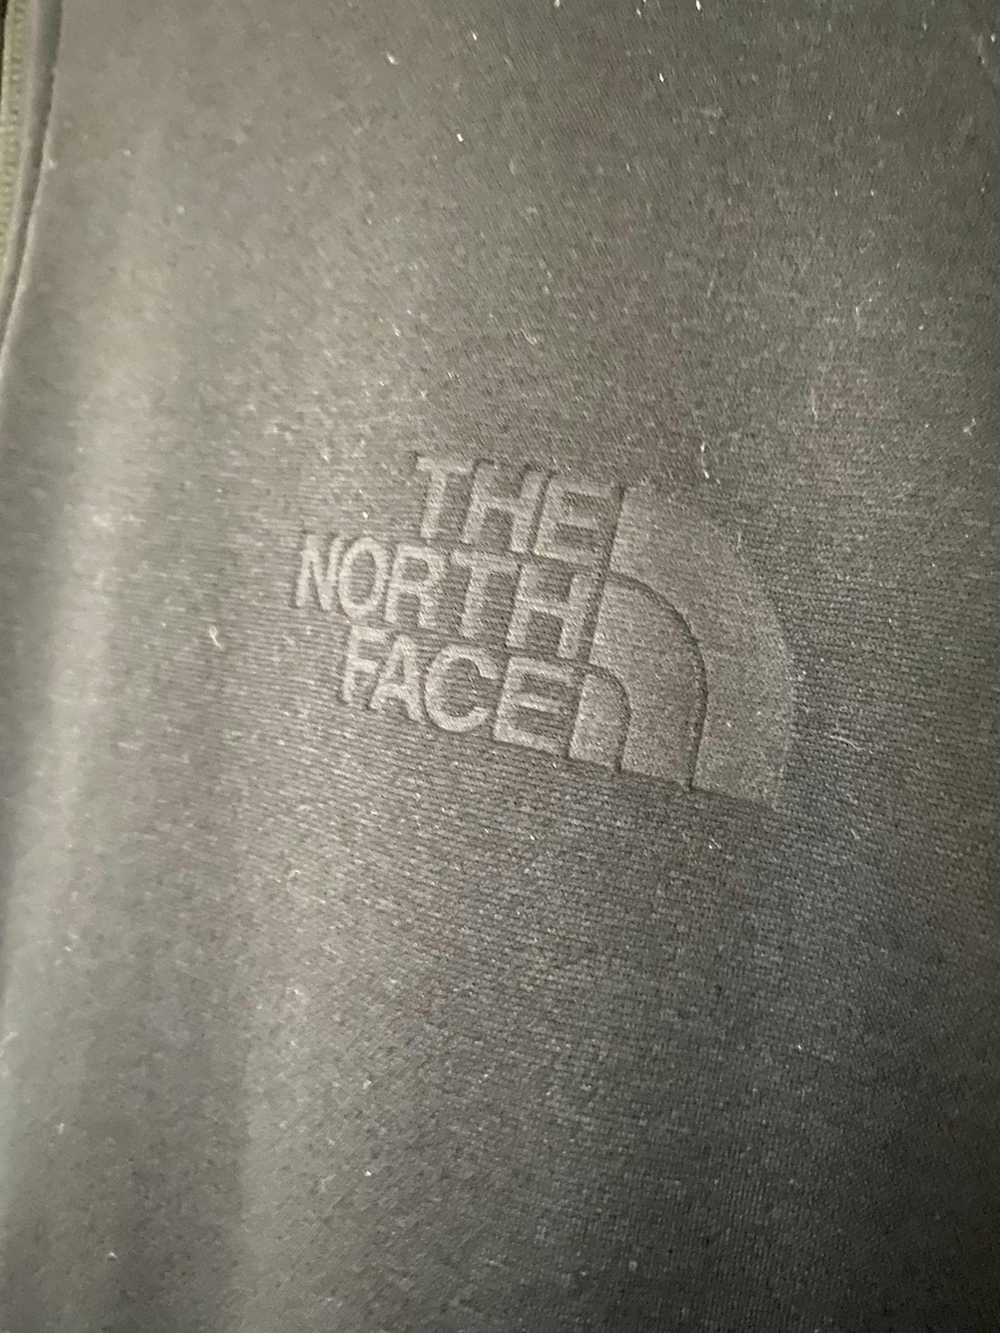 The North Face Black Jacket - image 3